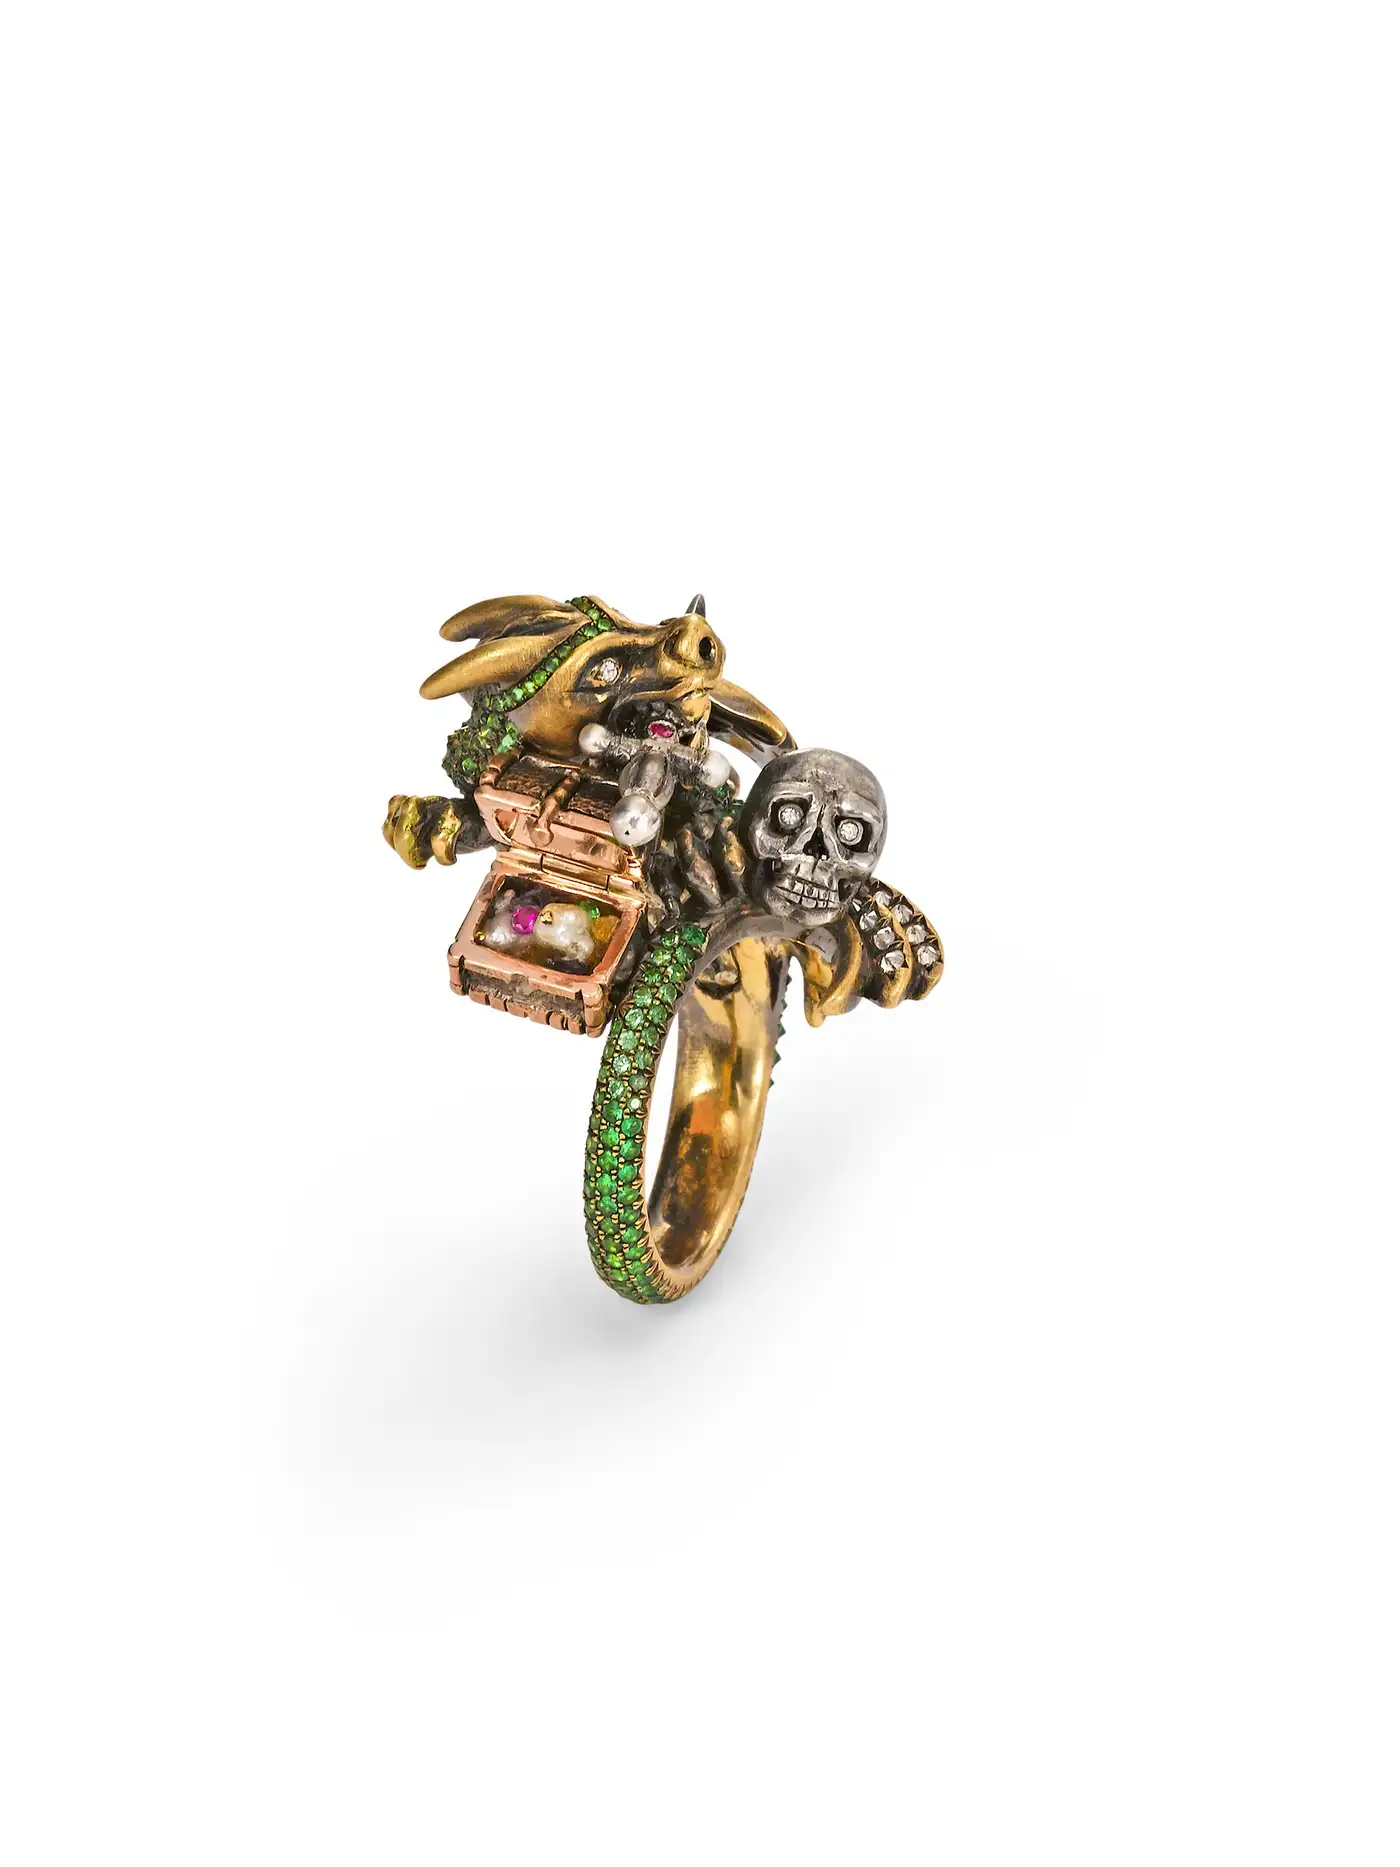 Wendy-Brandes-7-Ring-Diamond-and-Coloured-Gemstone-Animal-Design-Collection-3.webp